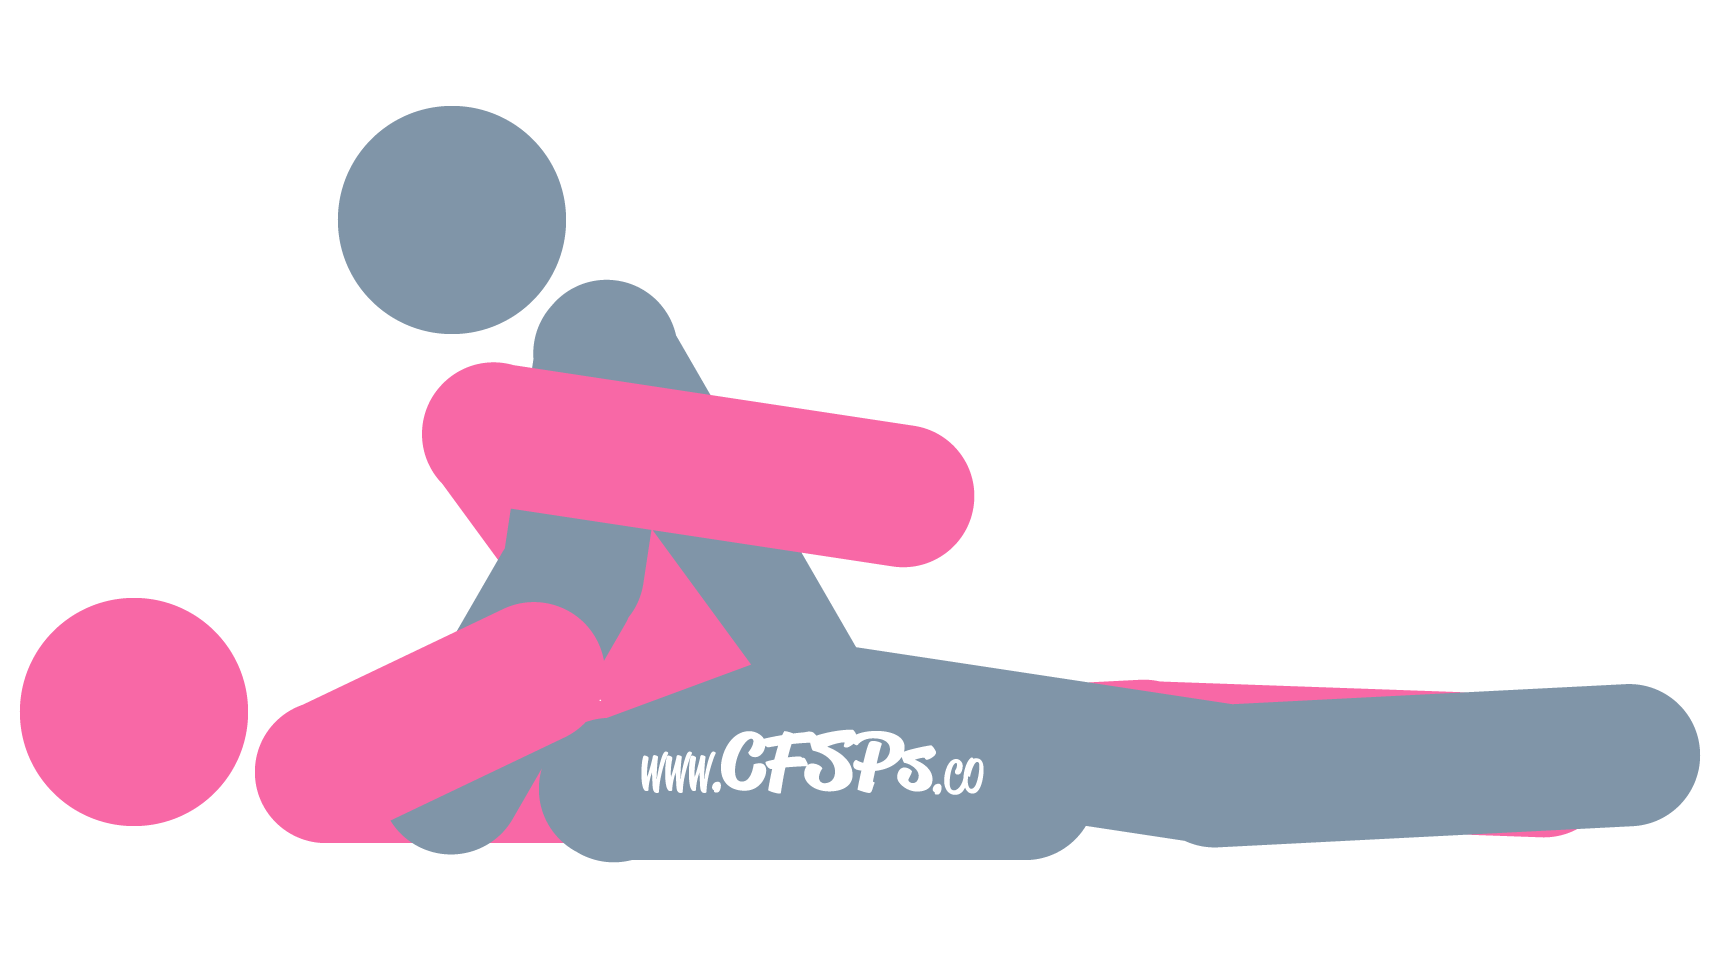 This stick figure image depicts a man and woman having sex in the Tight Missionary sex position. The woman is lying on her back with one leg bent and brought halfway up to her chest, and the other leg is flat on the bed. The man is positioned so that the leg on the side where the woman's leg is lifted is bent, and his knee is on the bed near her side. His other leg is straight back next to hers. He's leaning forward a little and supporting his upper body with his arms near her shoulders.